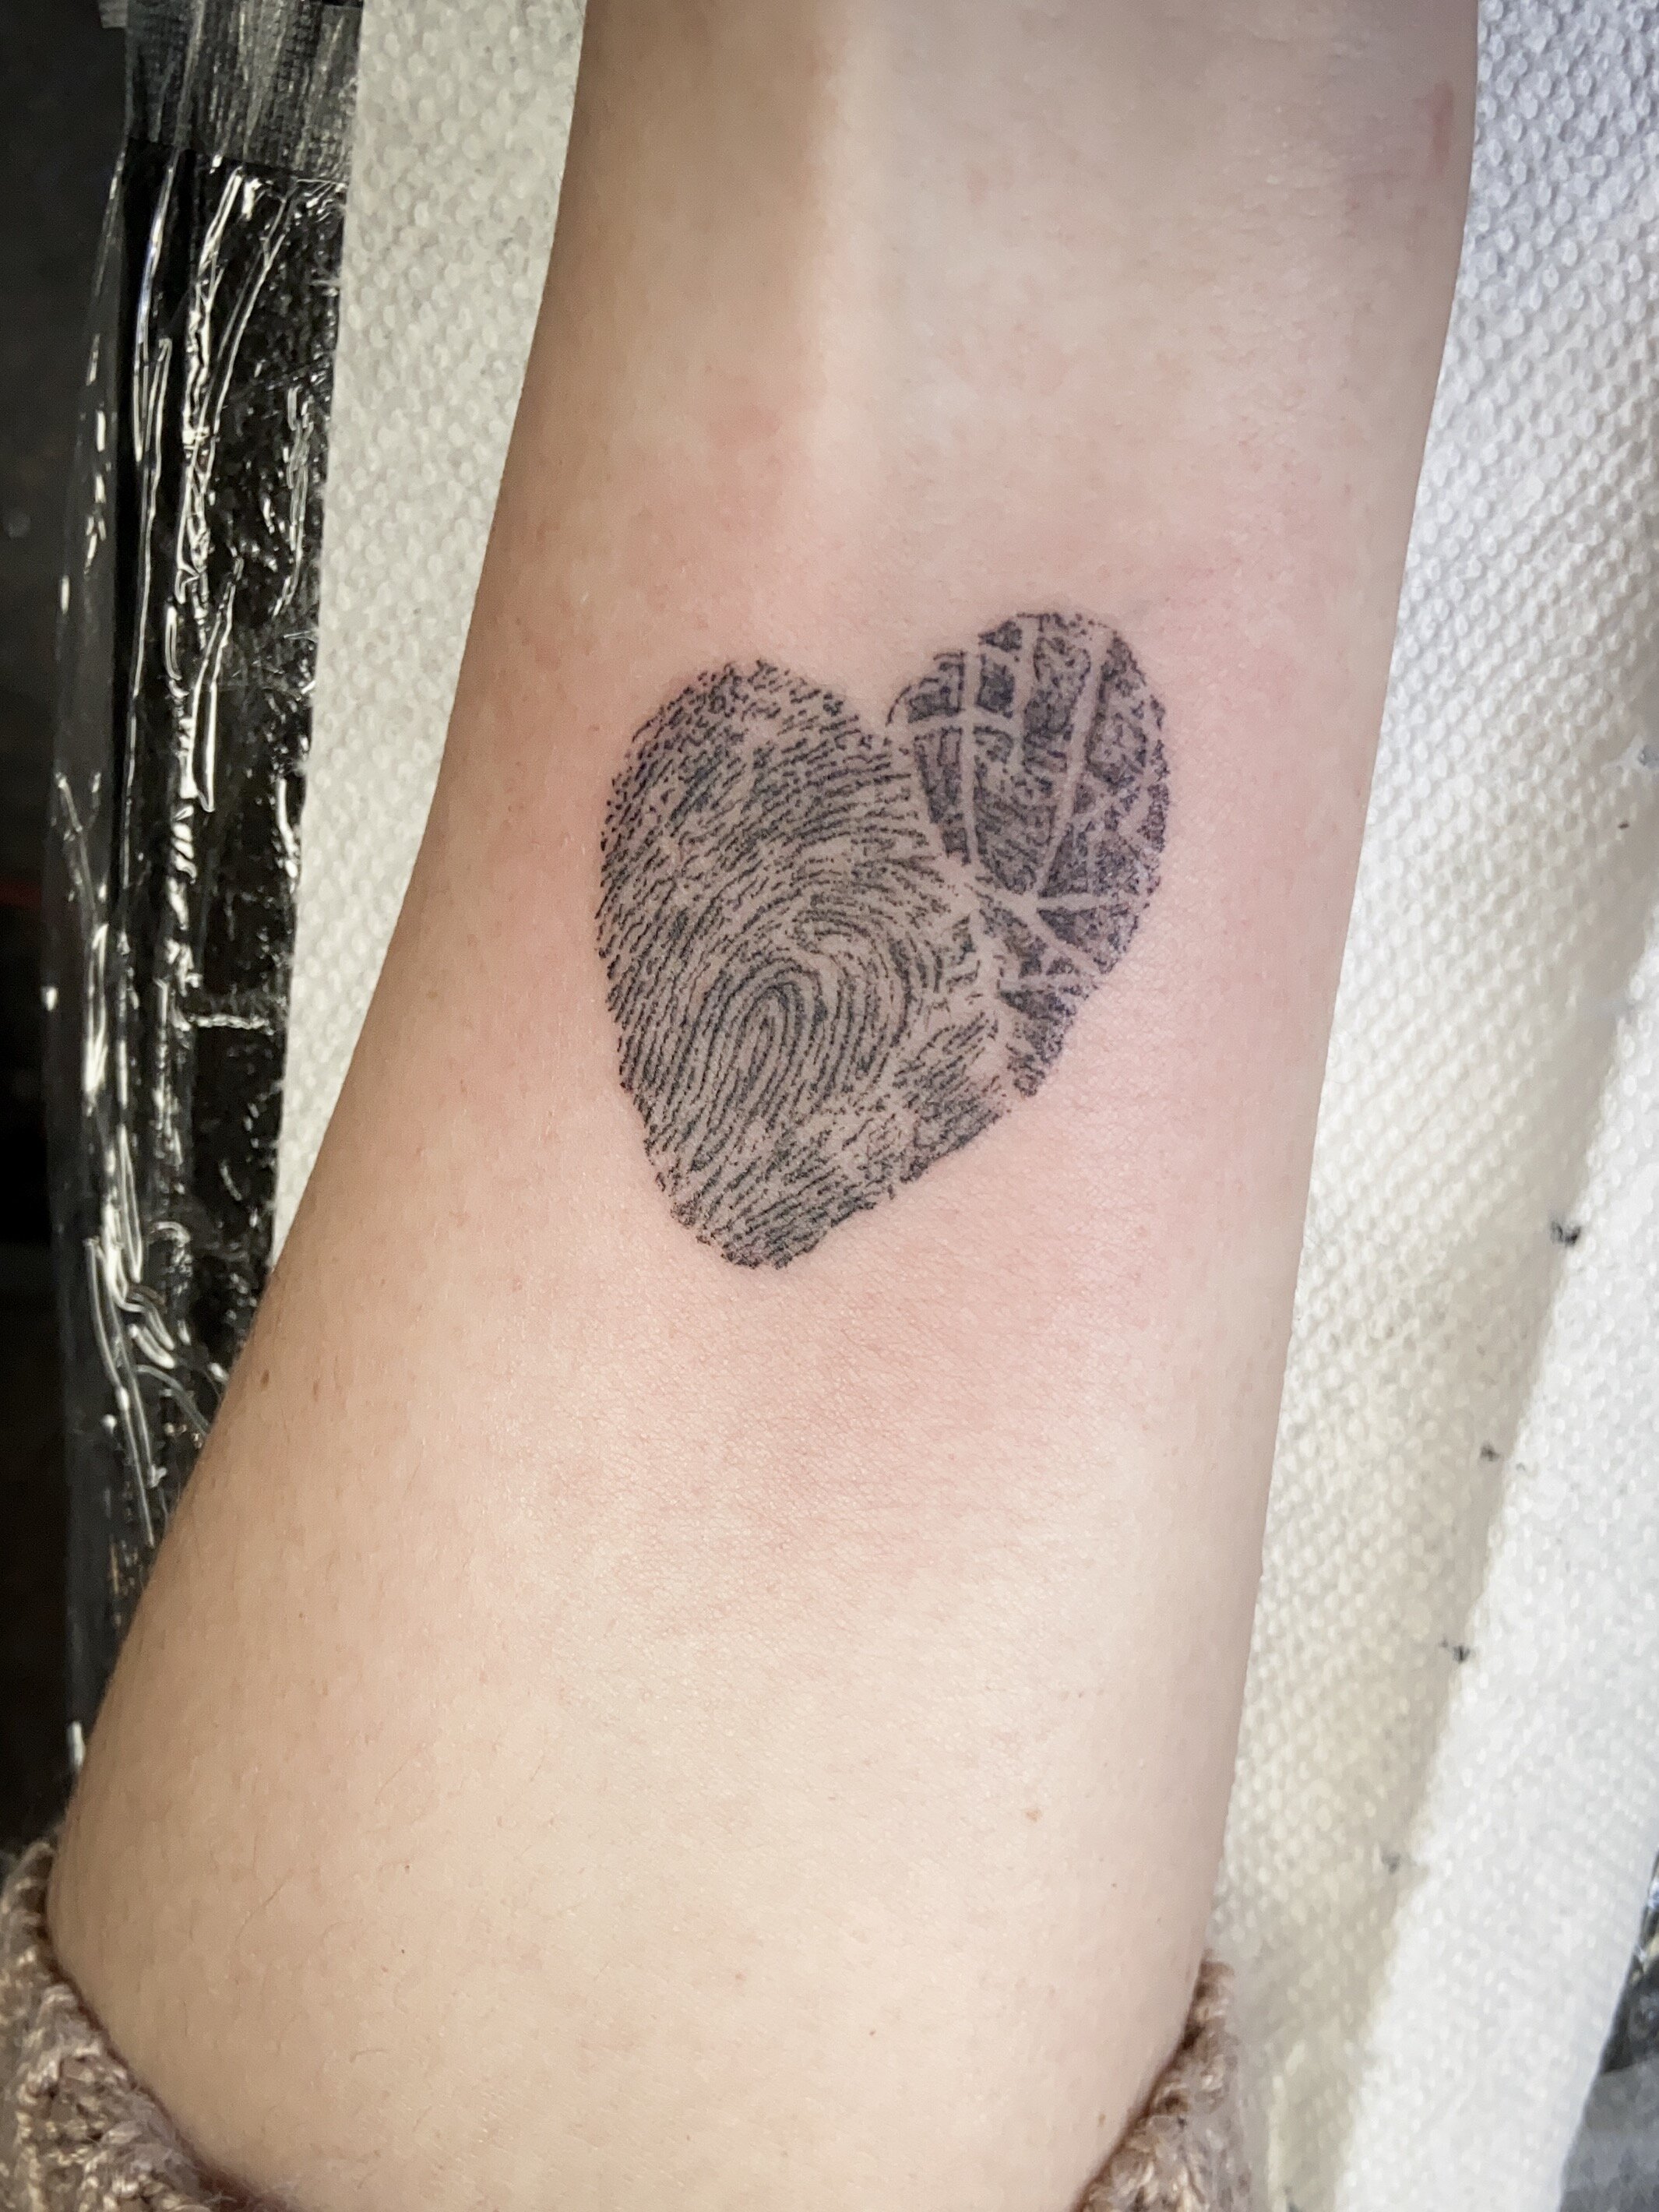  A detailed black and grey heart tattoo that is filled with fingerprint lines 